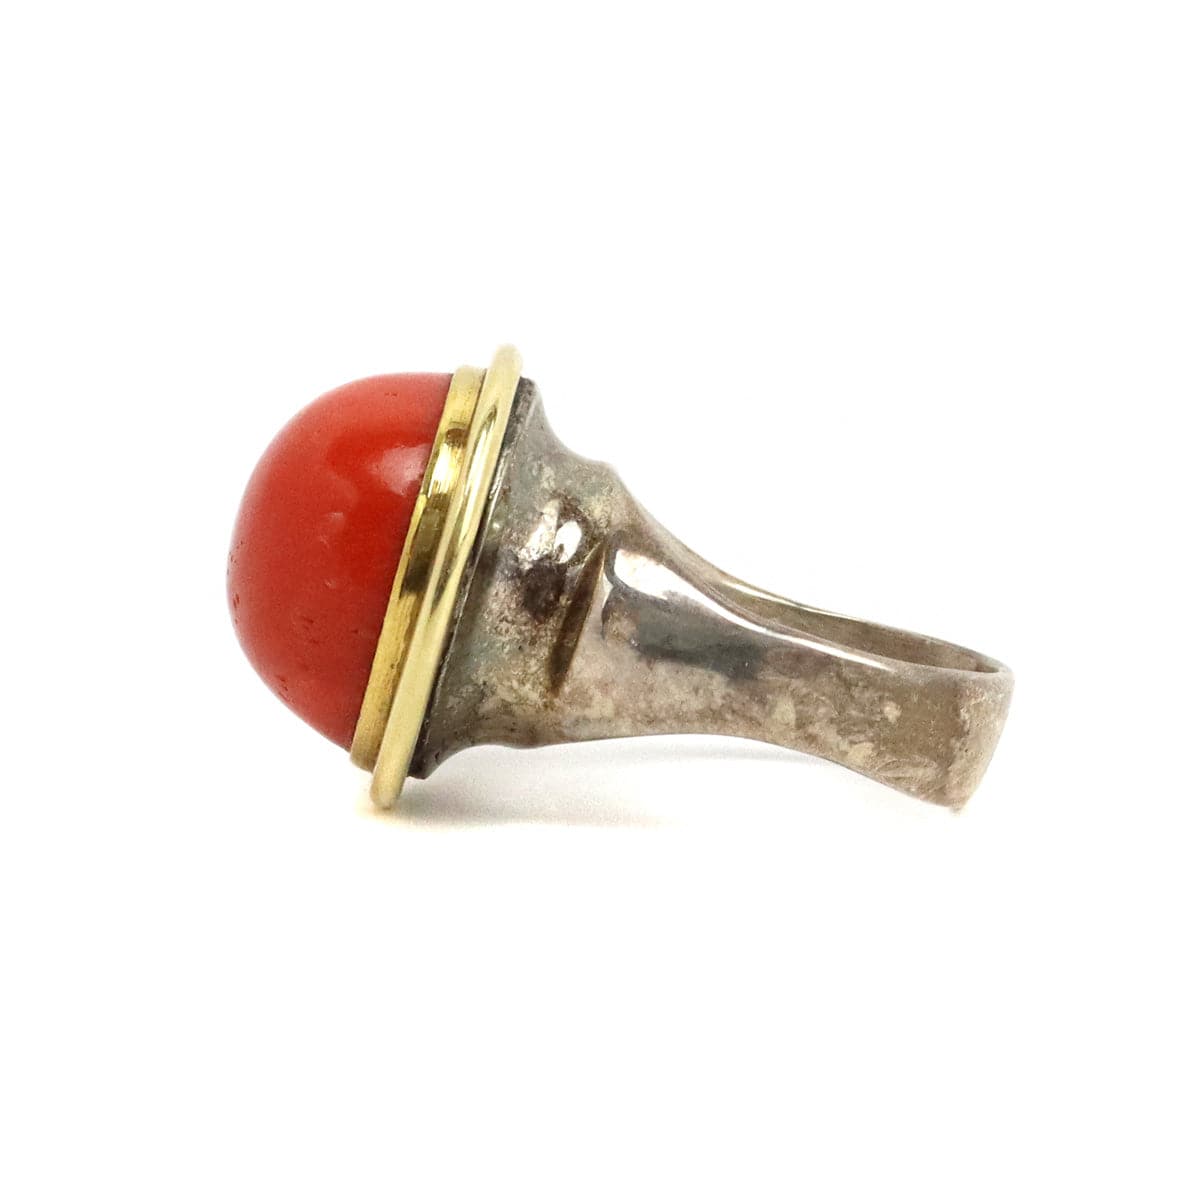 Frank Frank Jr. - Coral, 18K Gold, and Sterling Silver Ring, size 10.25 (J91699-0123-010) 4